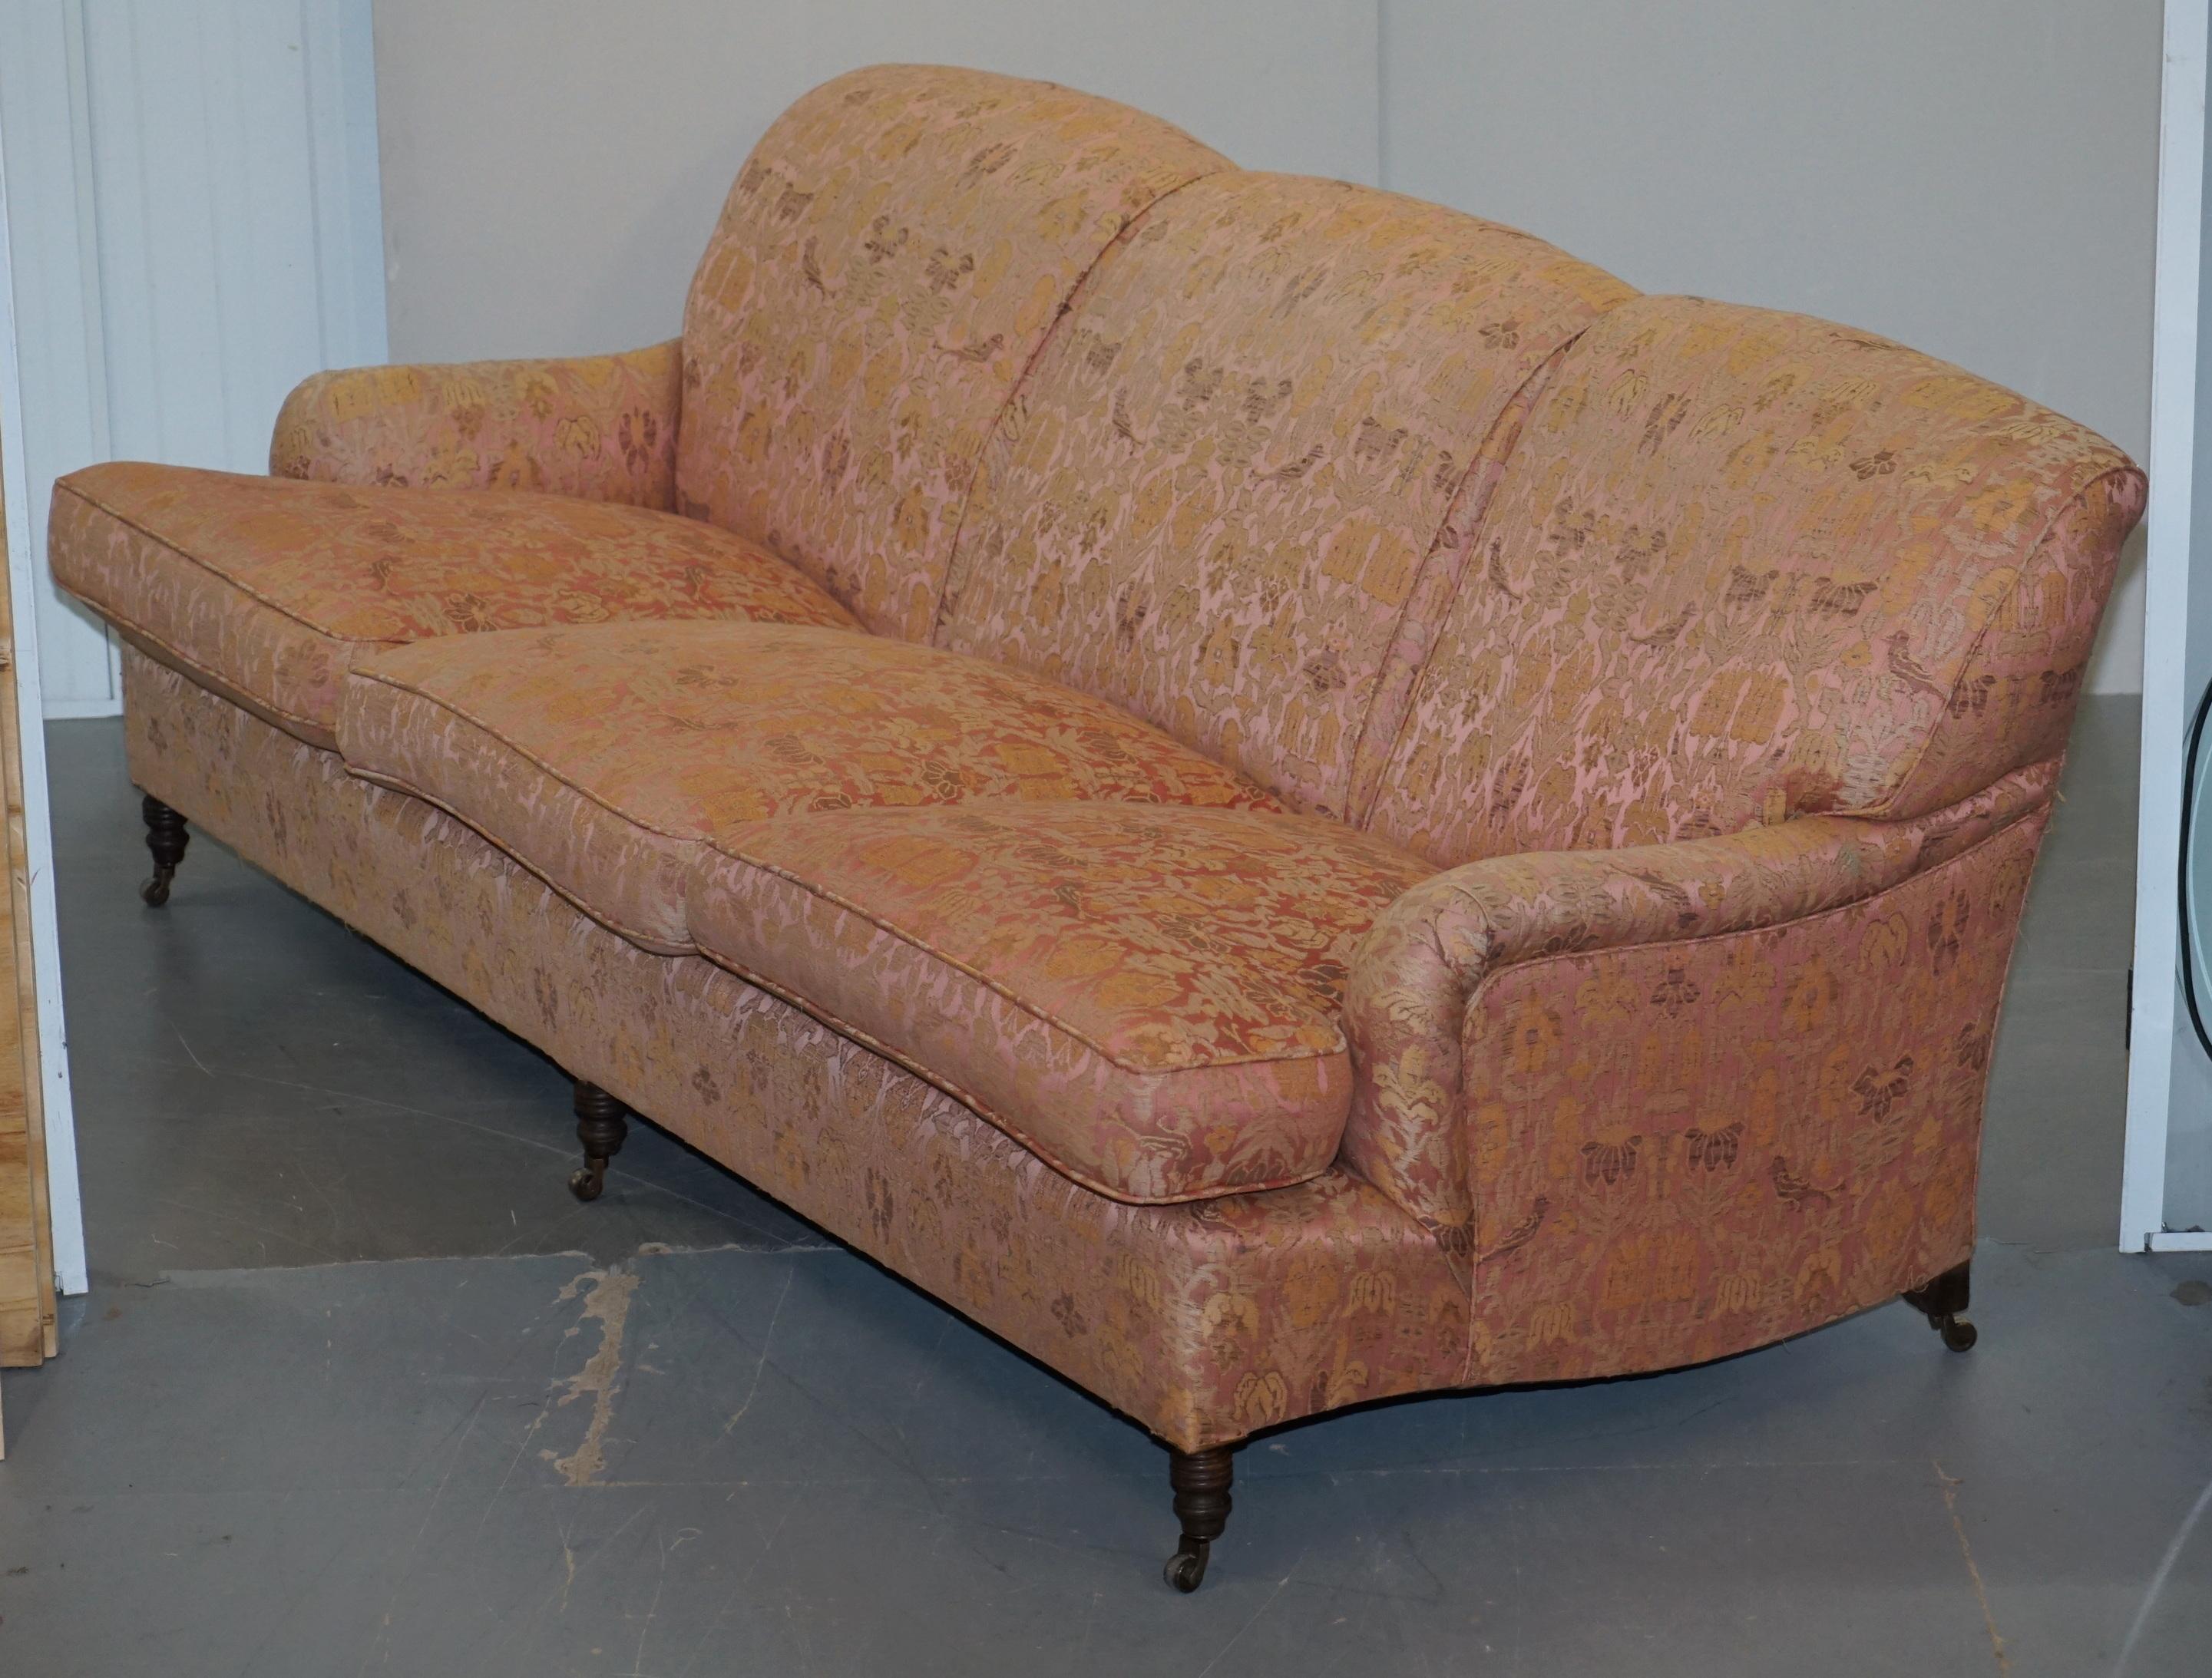 We delighted to offer for sale this lovely full sized huge George Smith Signature Scroll arm sofa RRP £13,000 with faded salmon pink embroidered upholstery of birds and flowers 

George Smith Chelsea make some of the finest handmade in England